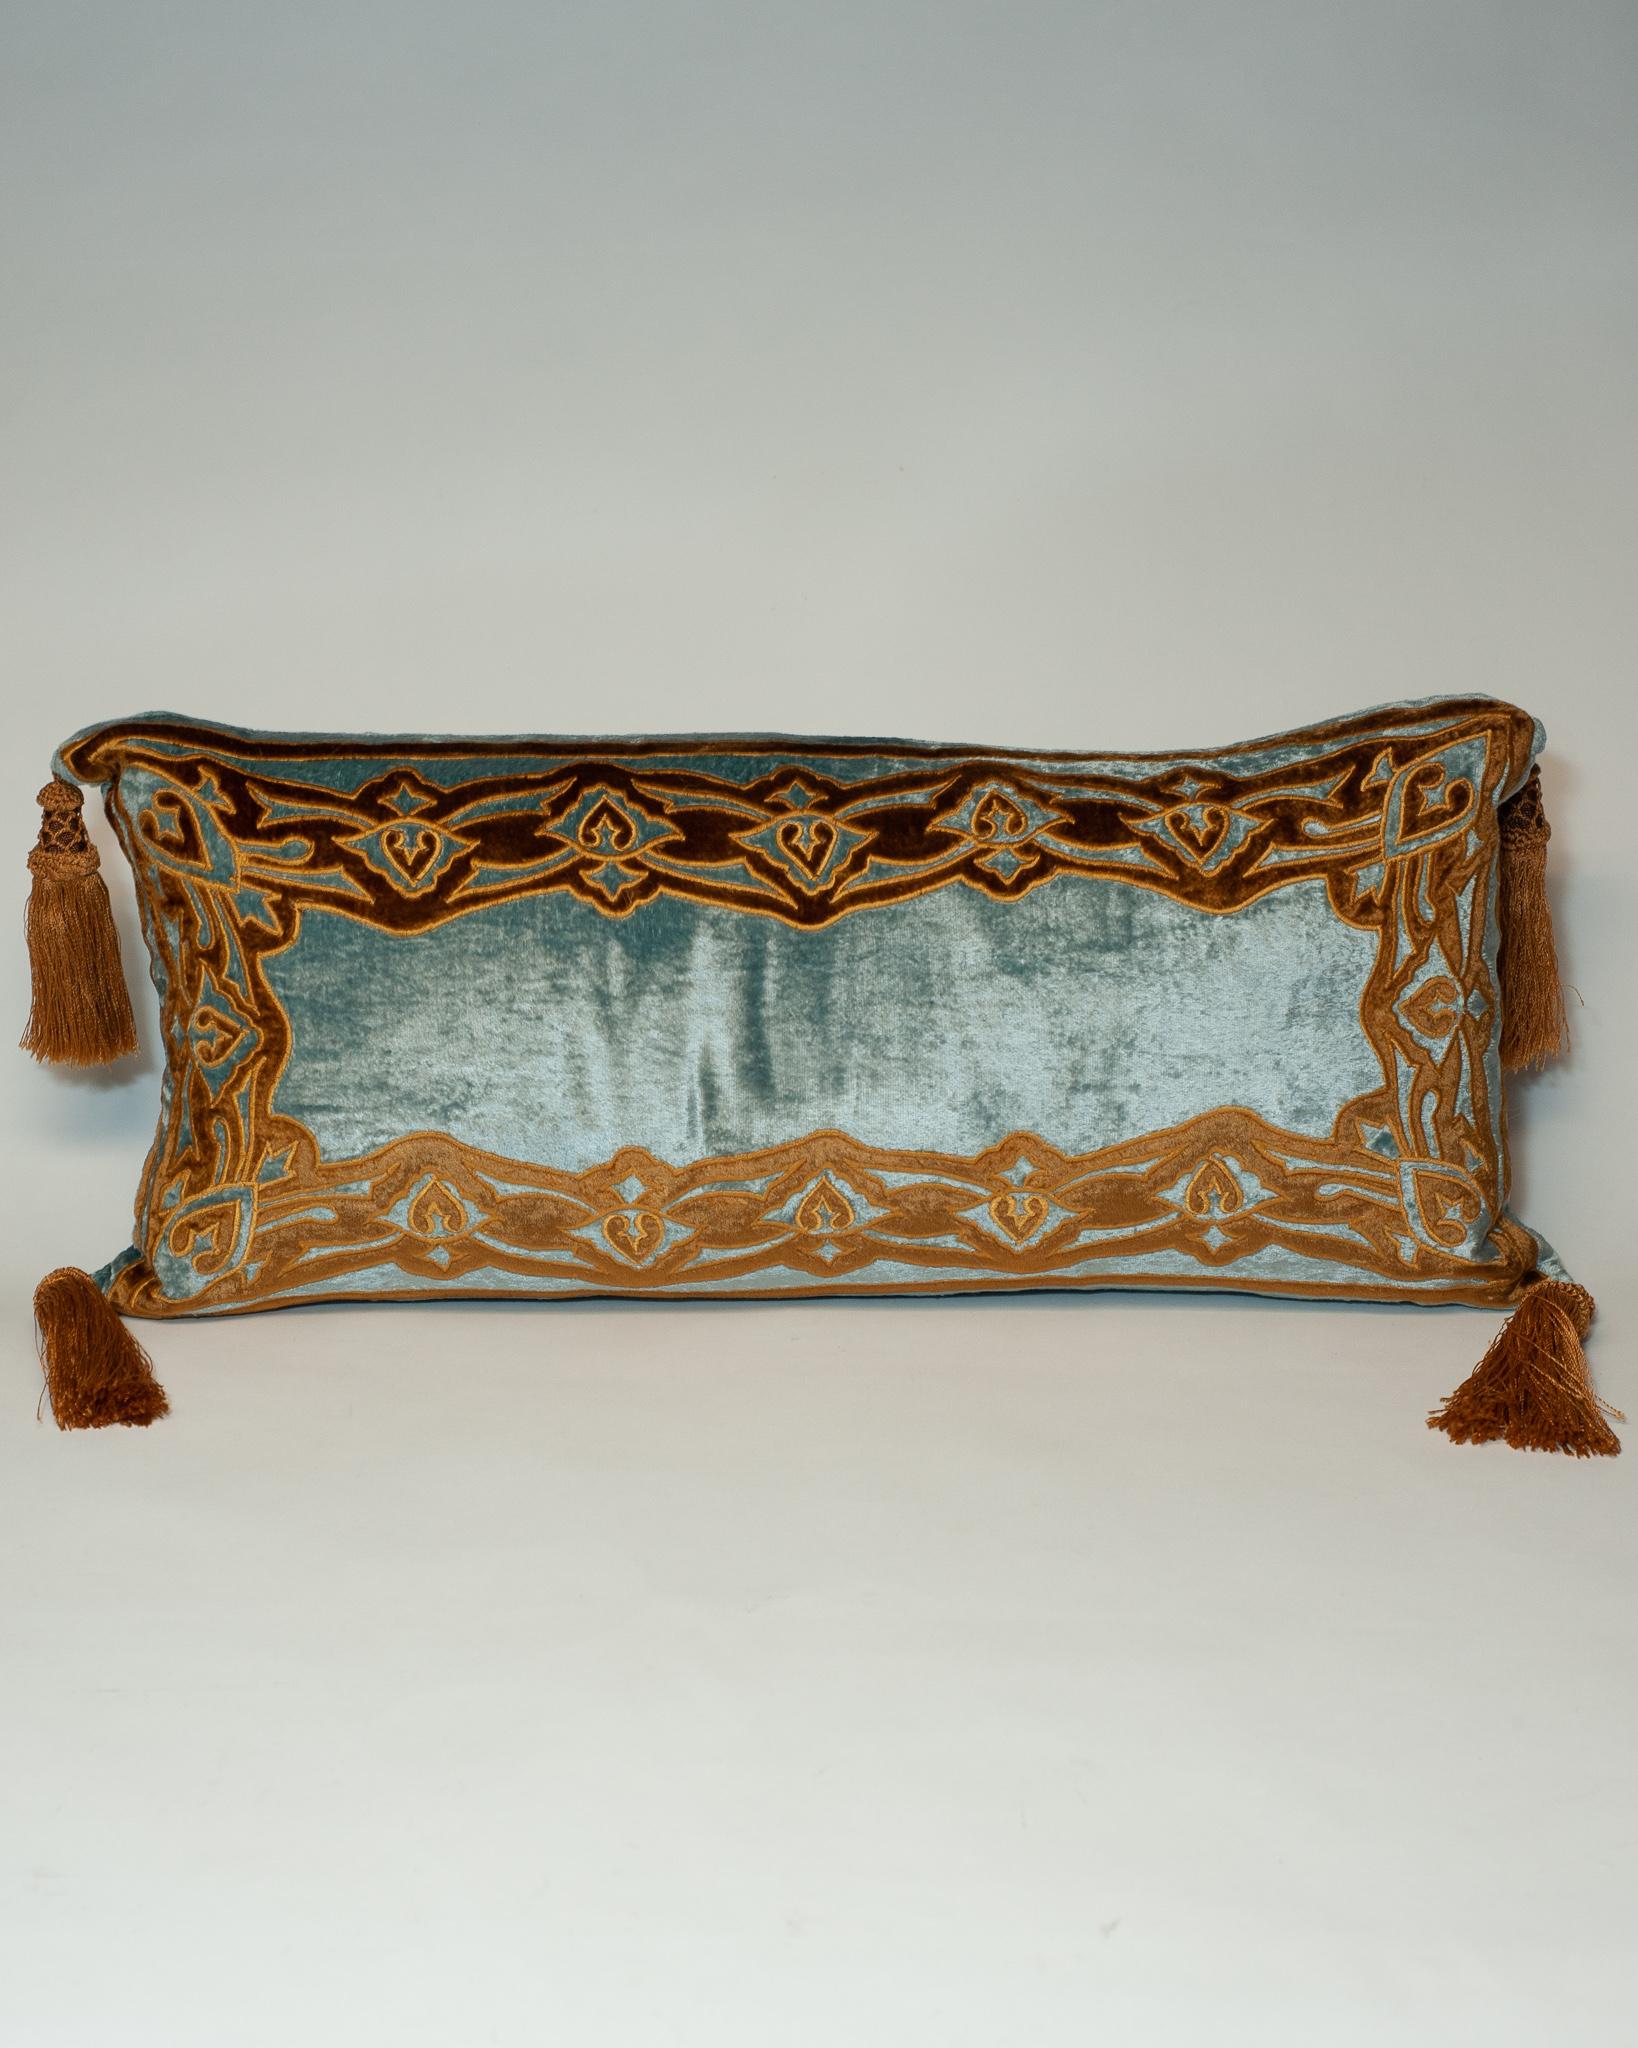 A blue cut velvet pillow on crème silk with gold embroidery, tassels and down filled, made in Italy.